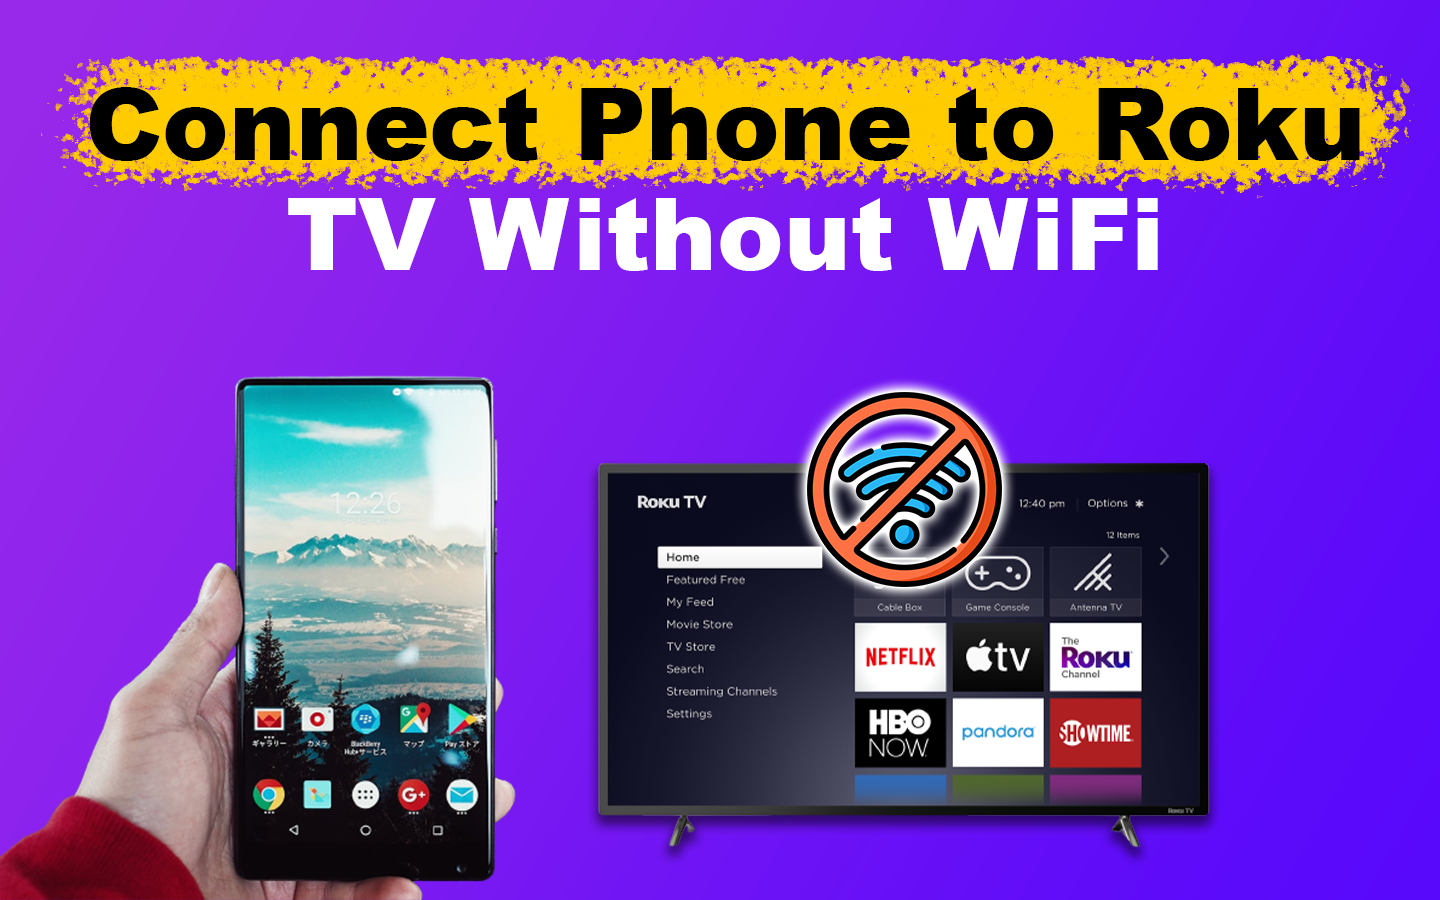 Connect Your Phone to Roku TV Without WiFi [Easy Way]